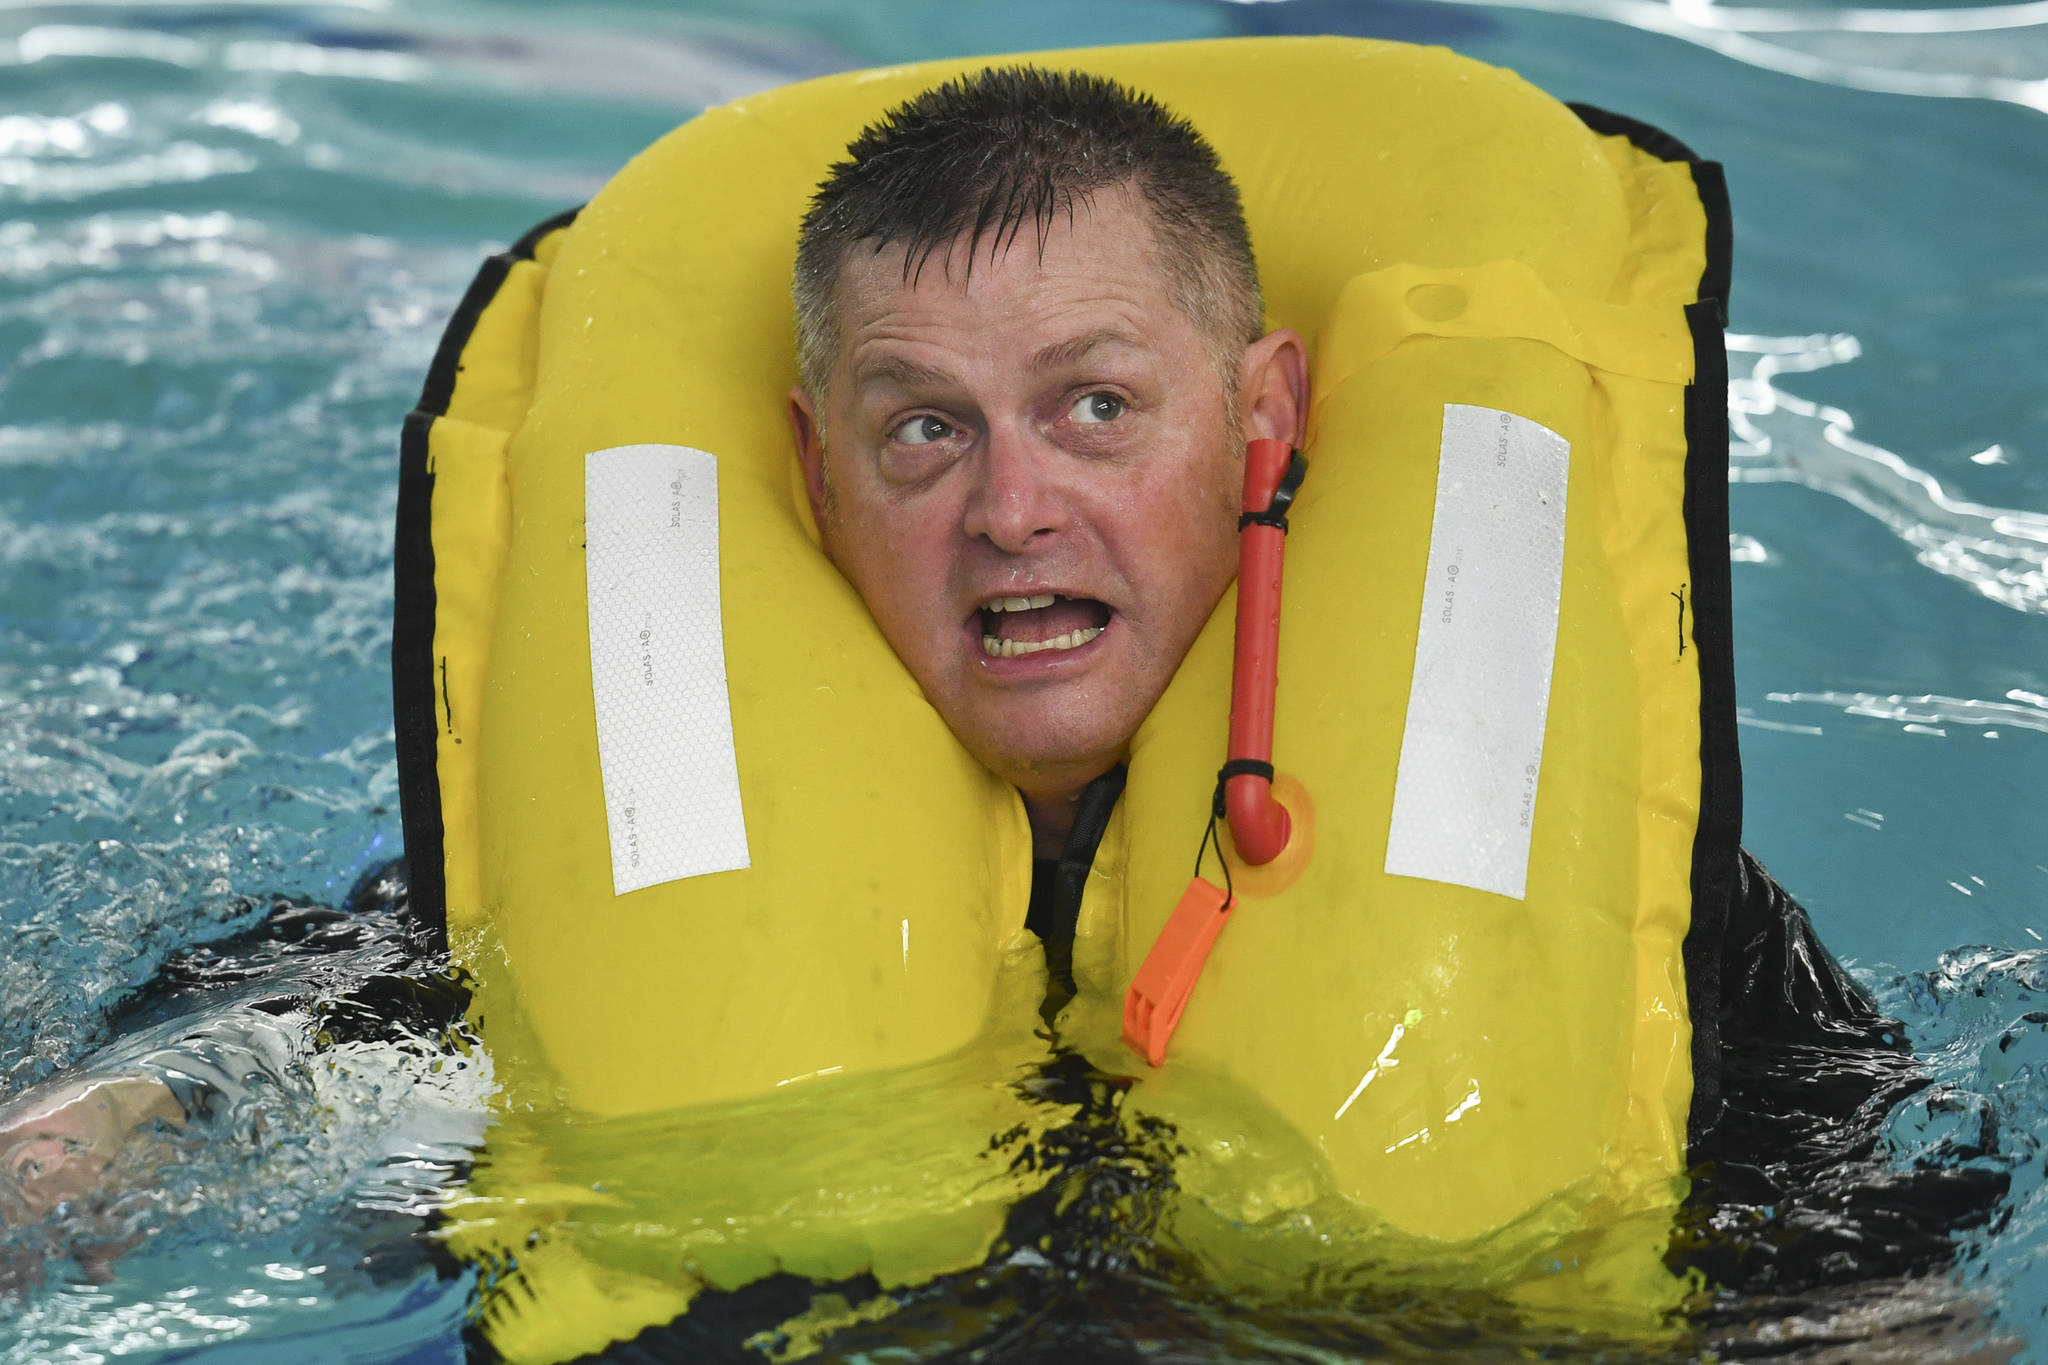 Lt. Cmdr. Kevin Dugan, a Coast Guards officer stationed in Juneau, takes a boating safety training class at the Augustus Brown Swimming Pool on Tuesday, Nov. 19, 2019. The class will qualify the members to teach students around the state about the use and importance of life vests. (Michael Penn | Juneau Empire)